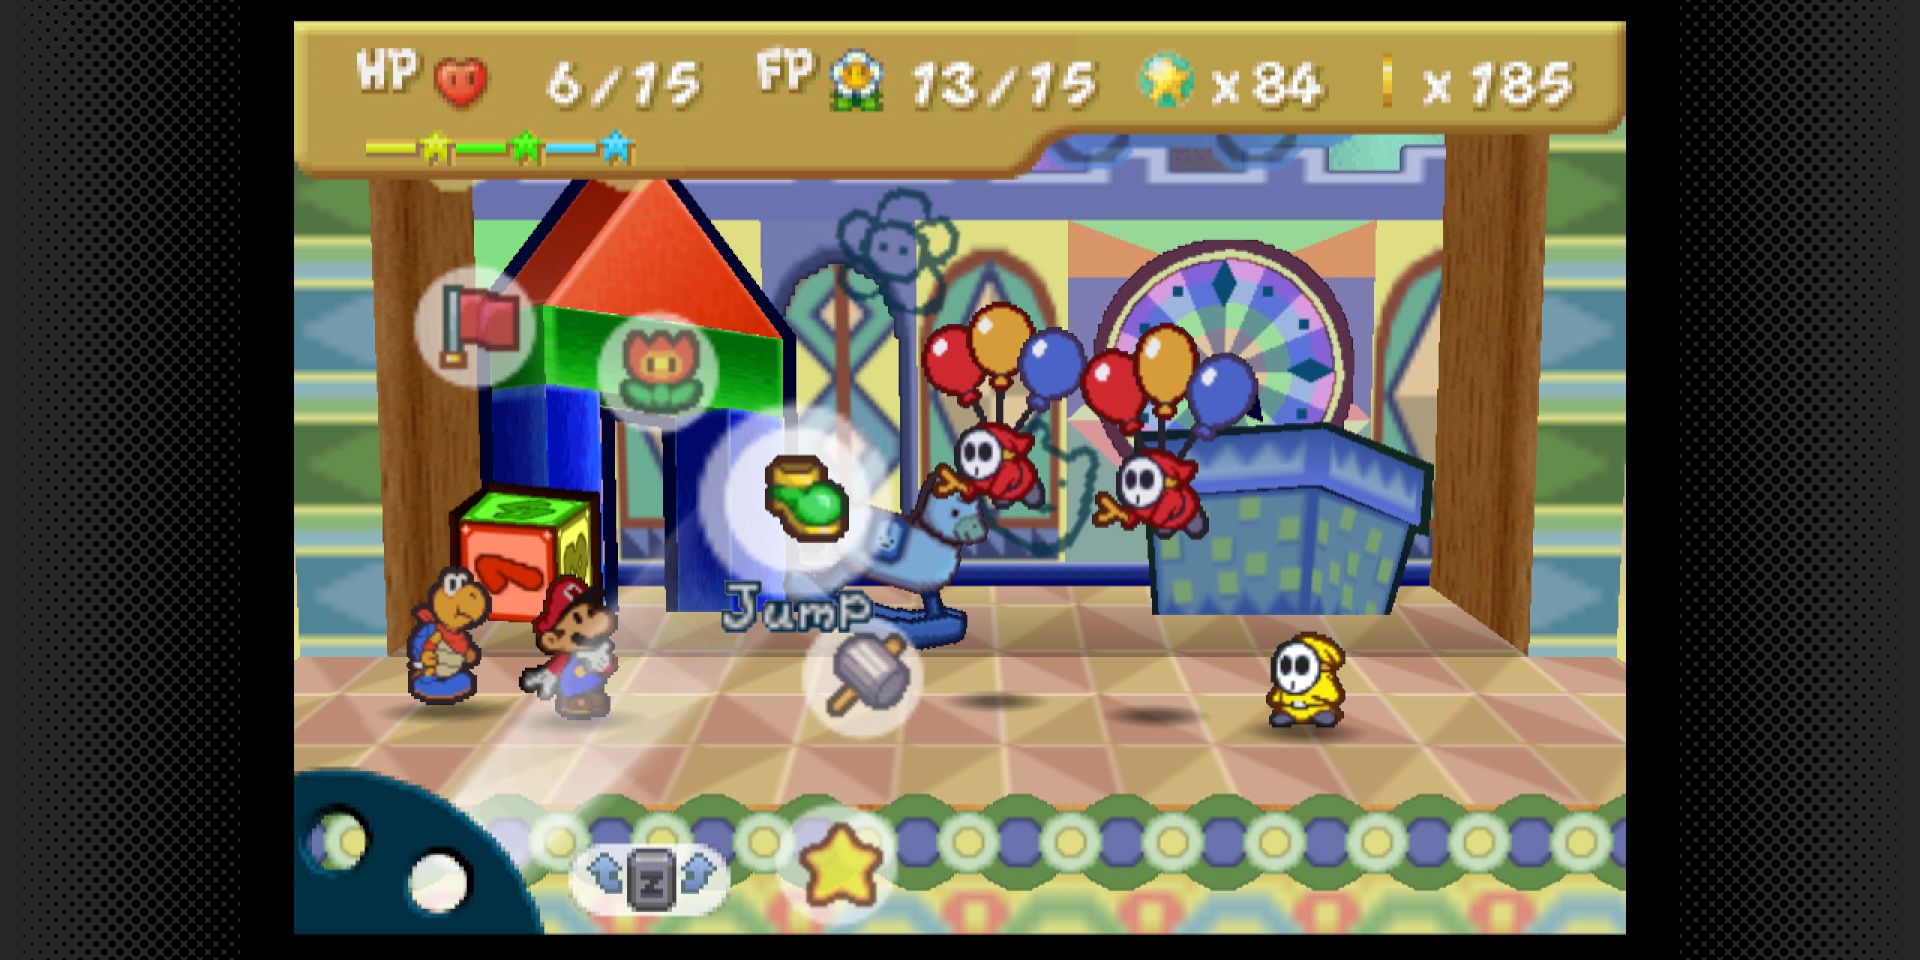 A screenshot showing a battle between Mario and some shyguys in Paper Mario